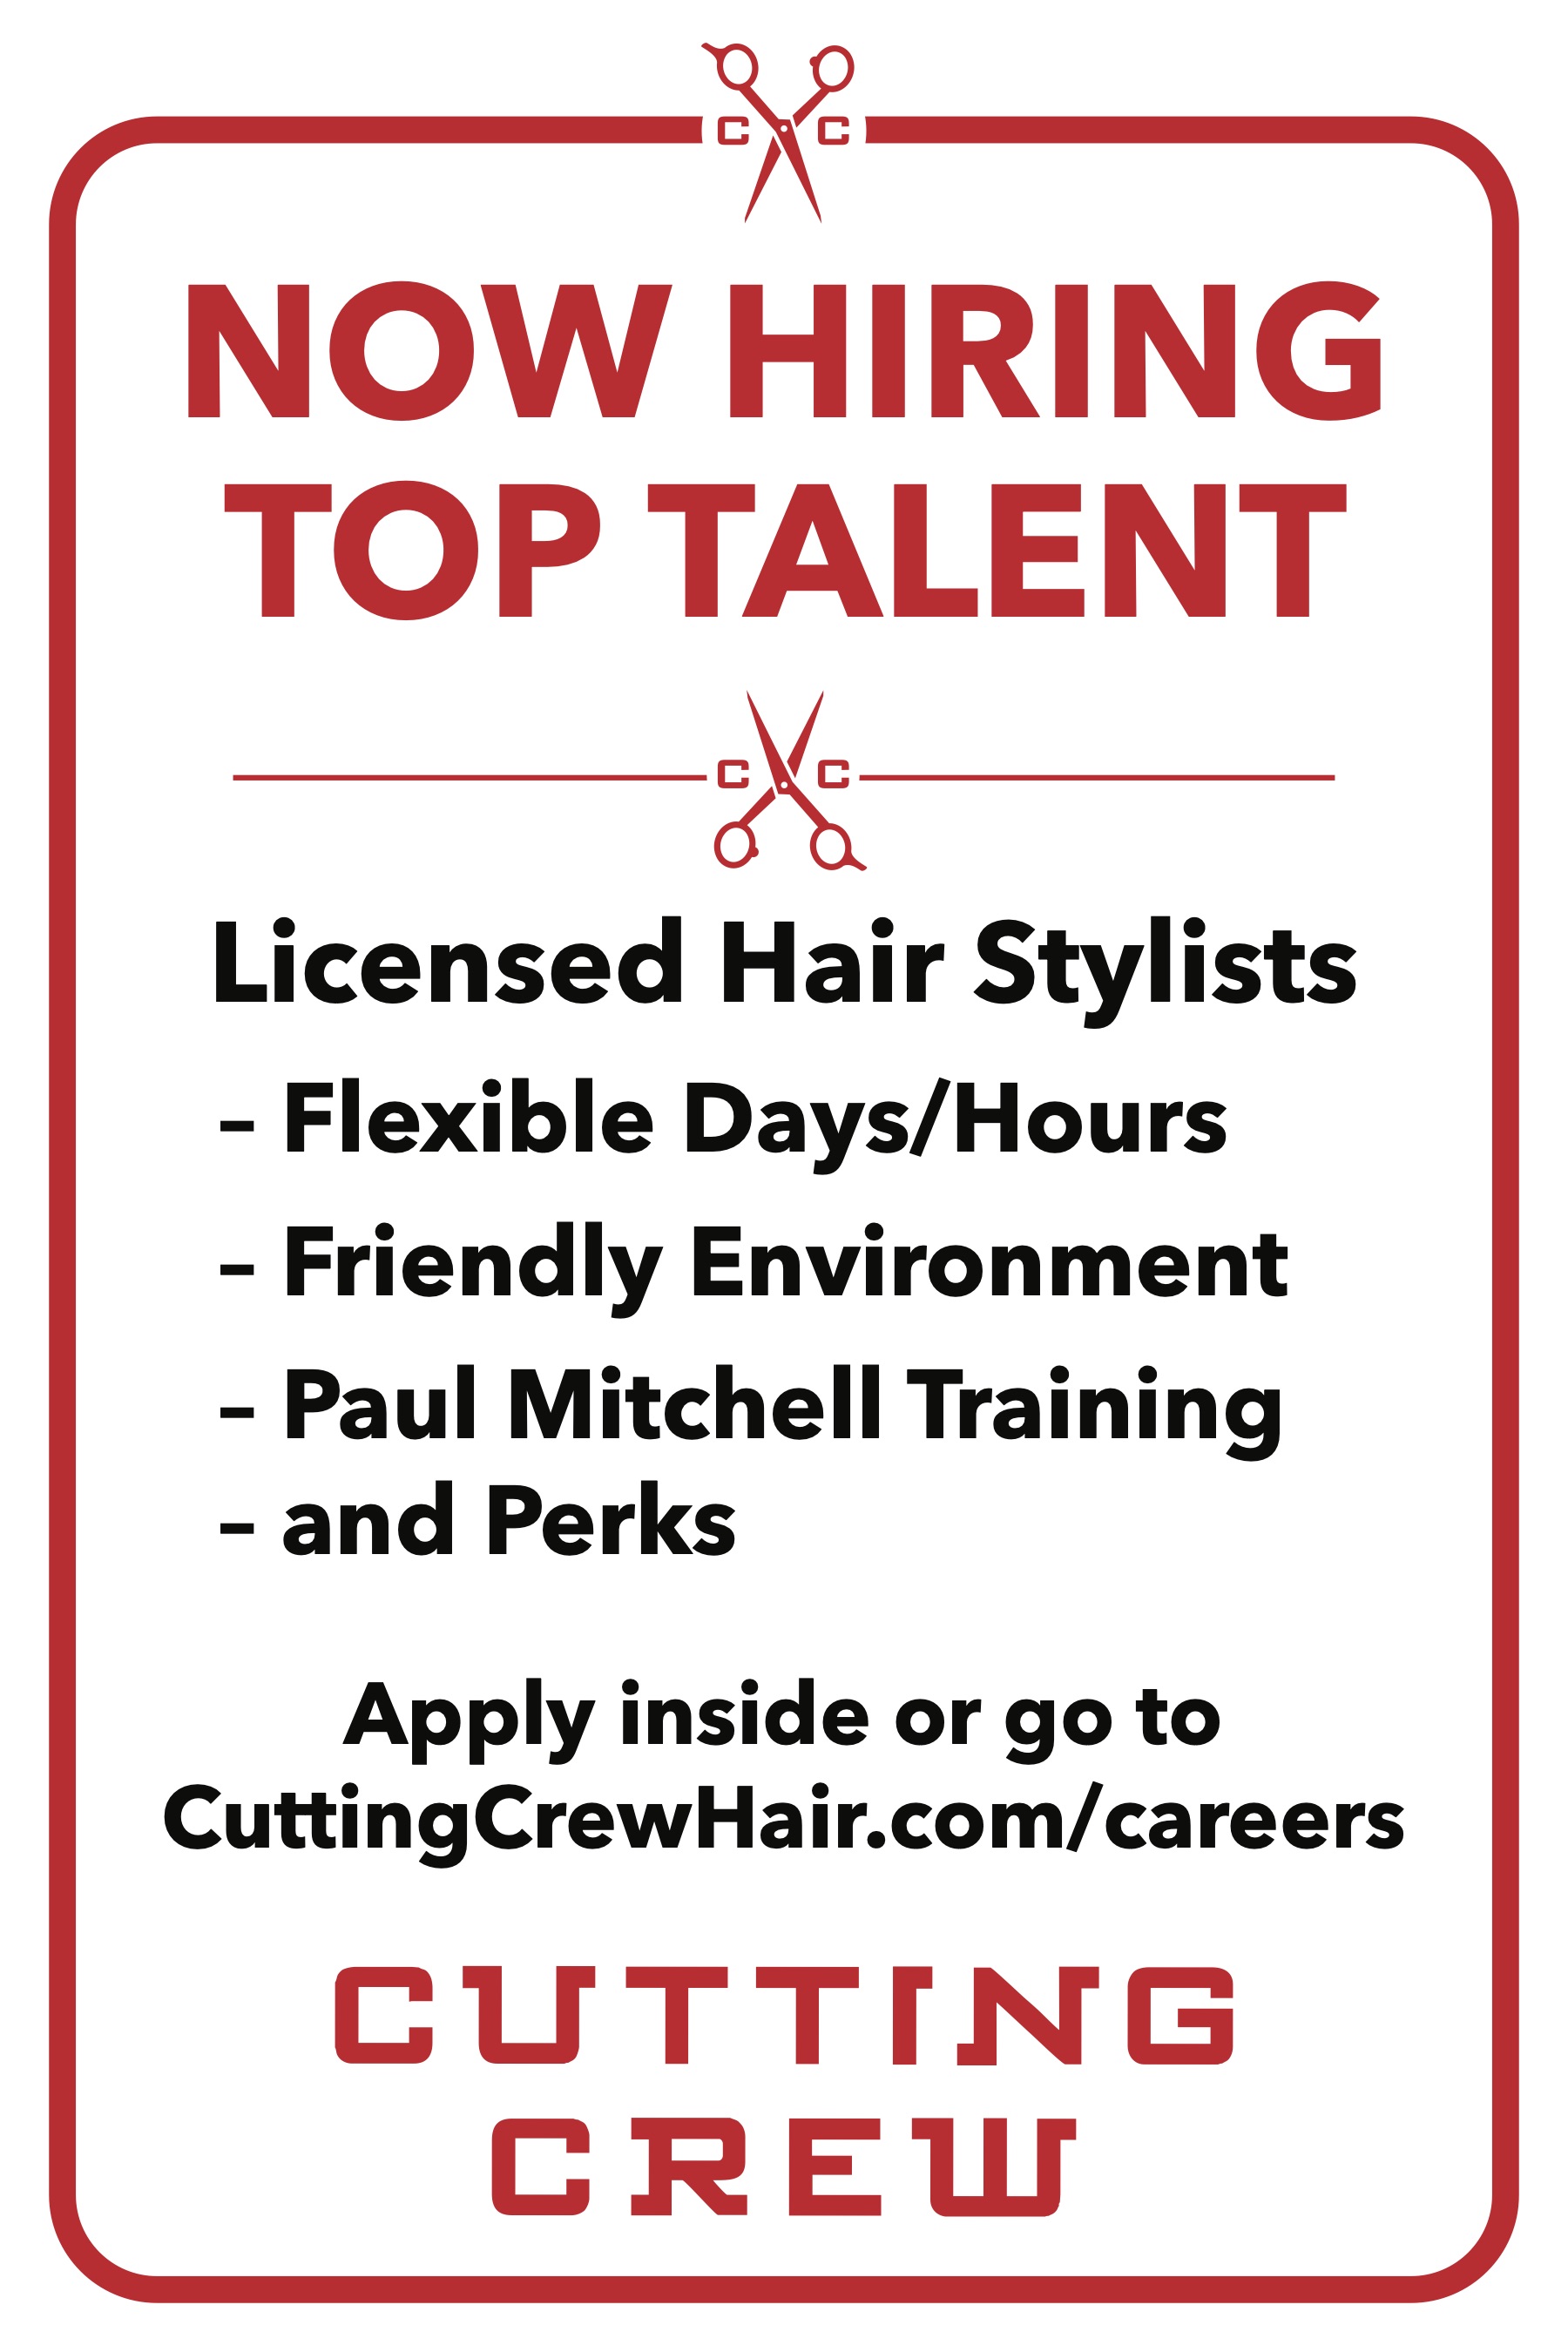 Jump start your career today with the Cutting Crew Hair Salon team and our current employment opportunities in Hornell.